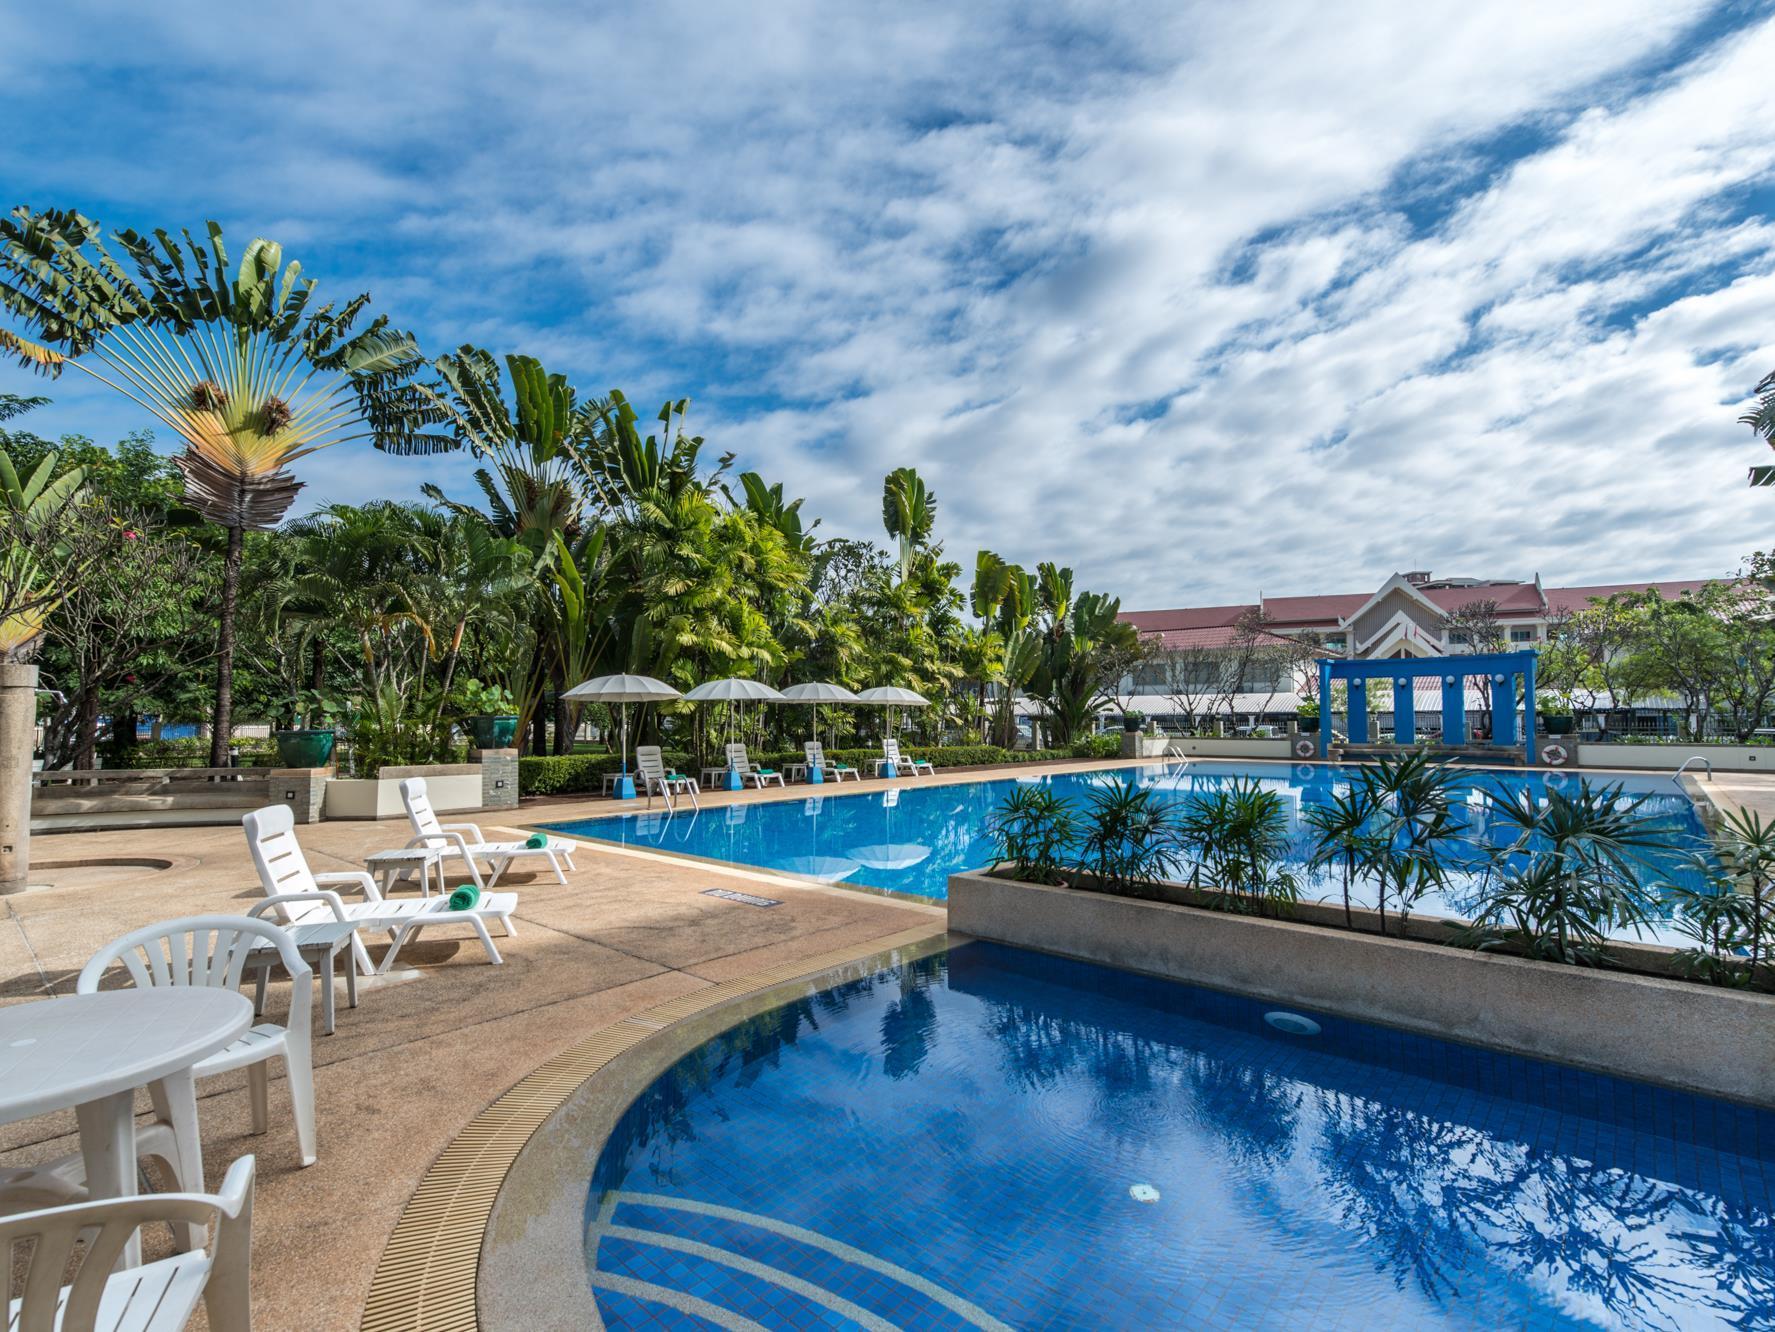 Somerset Vientiane Serviced Residence Vientiane FAQ 2017, What facilities are there in Somerset Vientiane Serviced Residence Vientiane 2017, What Languages Spoken are Supported in Somerset Vientiane Serviced Residence Vientiane 2017, Which payment cards are accepted in Somerset Vientiane Serviced Residence Vientiane , Vientiane Somerset Vientiane Serviced Residence room facilities and services Q&A 2017, Vientiane Somerset Vientiane Serviced Residence online booking services 2017, Vientiane Somerset Vientiane Serviced Residence address 2017, Vientiane Somerset Vientiane Serviced Residence telephone number 2017,Vientiane Somerset Vientiane Serviced Residence map 2017, Vientiane Somerset Vientiane Serviced Residence traffic guide 2017, how to go Vientiane Somerset Vientiane Serviced Residence, Vientiane Somerset Vientiane Serviced Residence booking online 2017, Vientiane Somerset Vientiane Serviced Residence room types 2017.